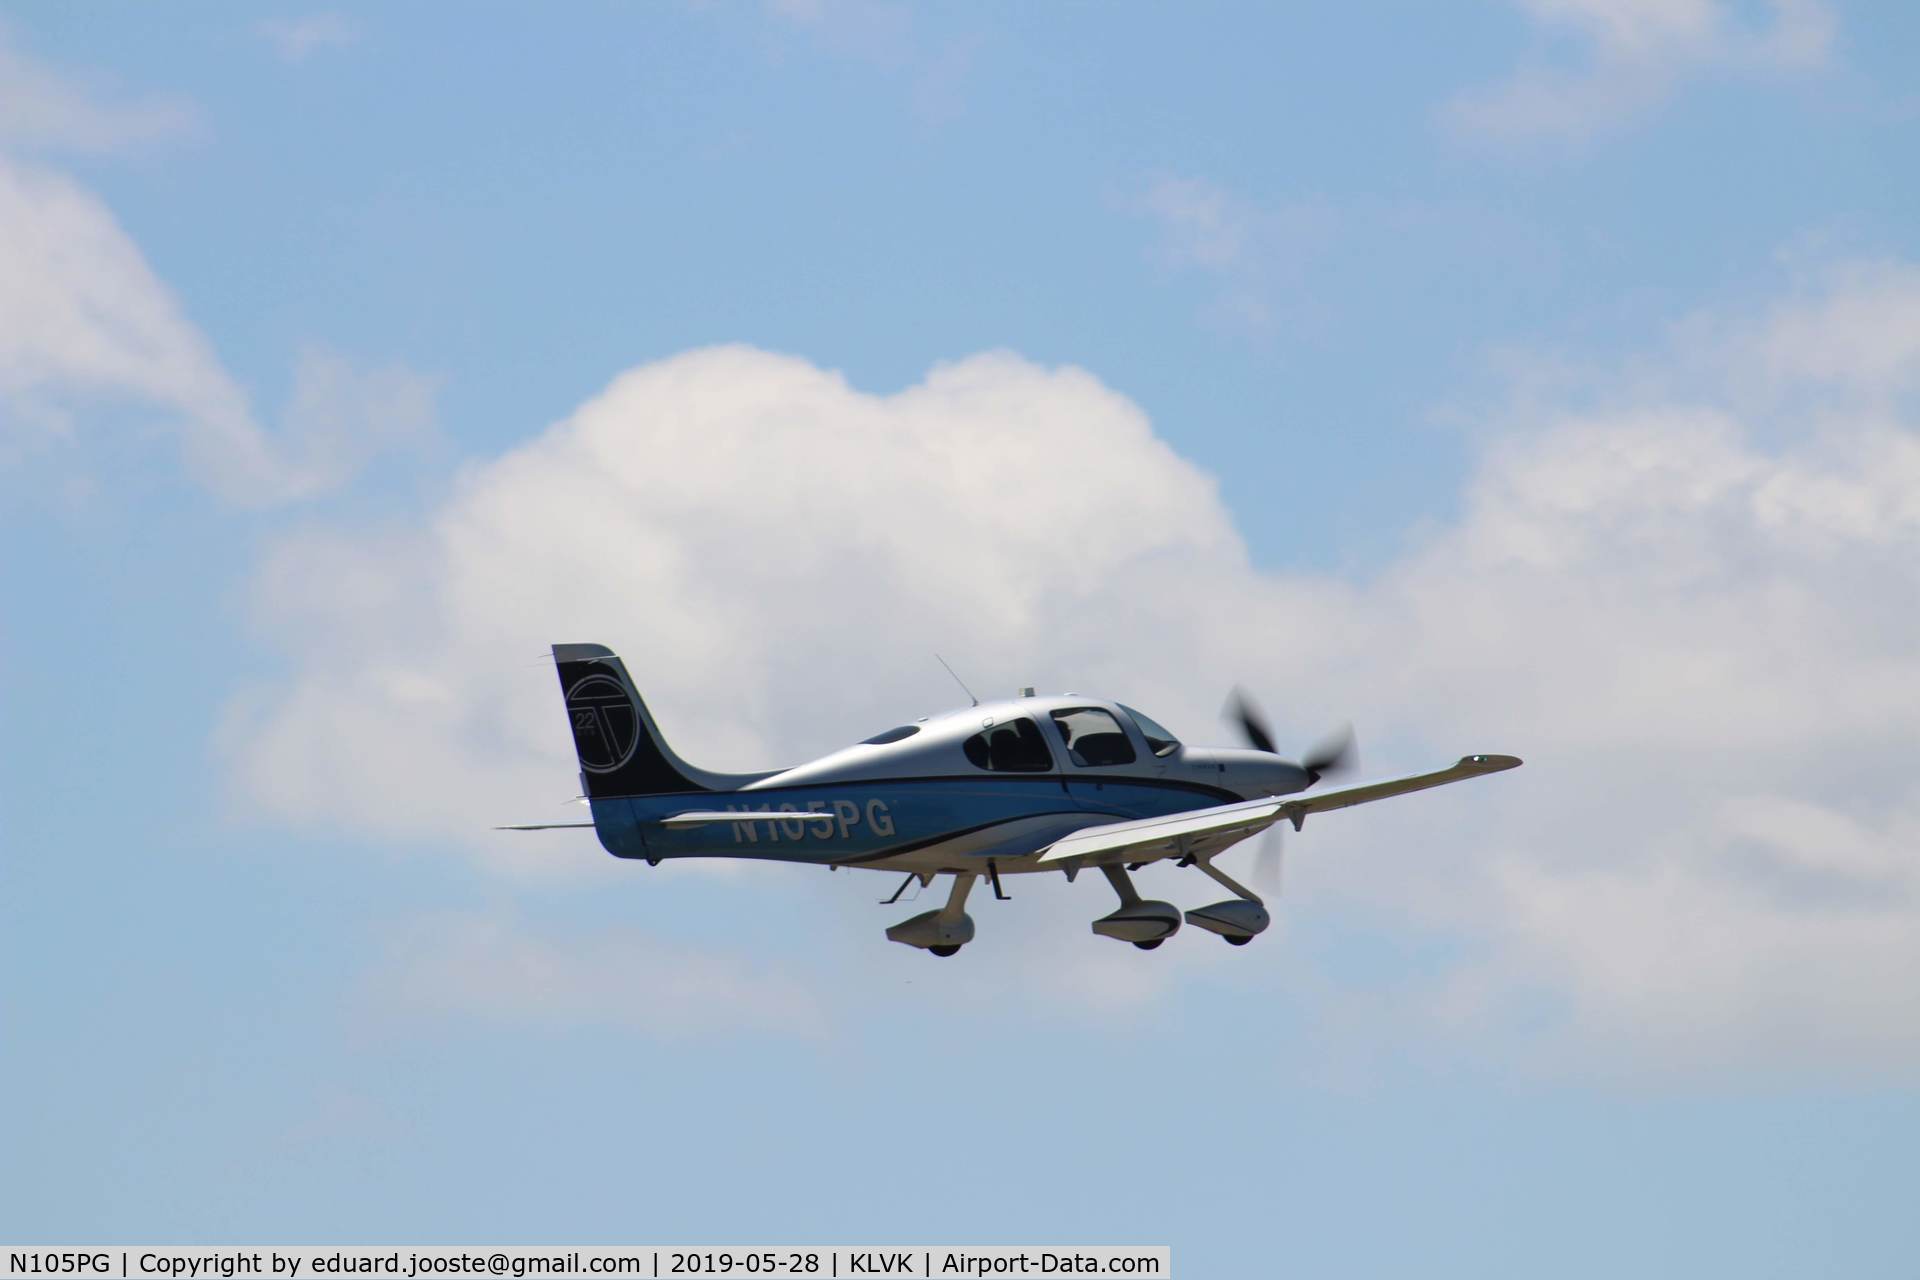 N105PG, Cirrus SR22 C/N 2907, Taken during the Wings of Freedom tour at Livermore, CA.